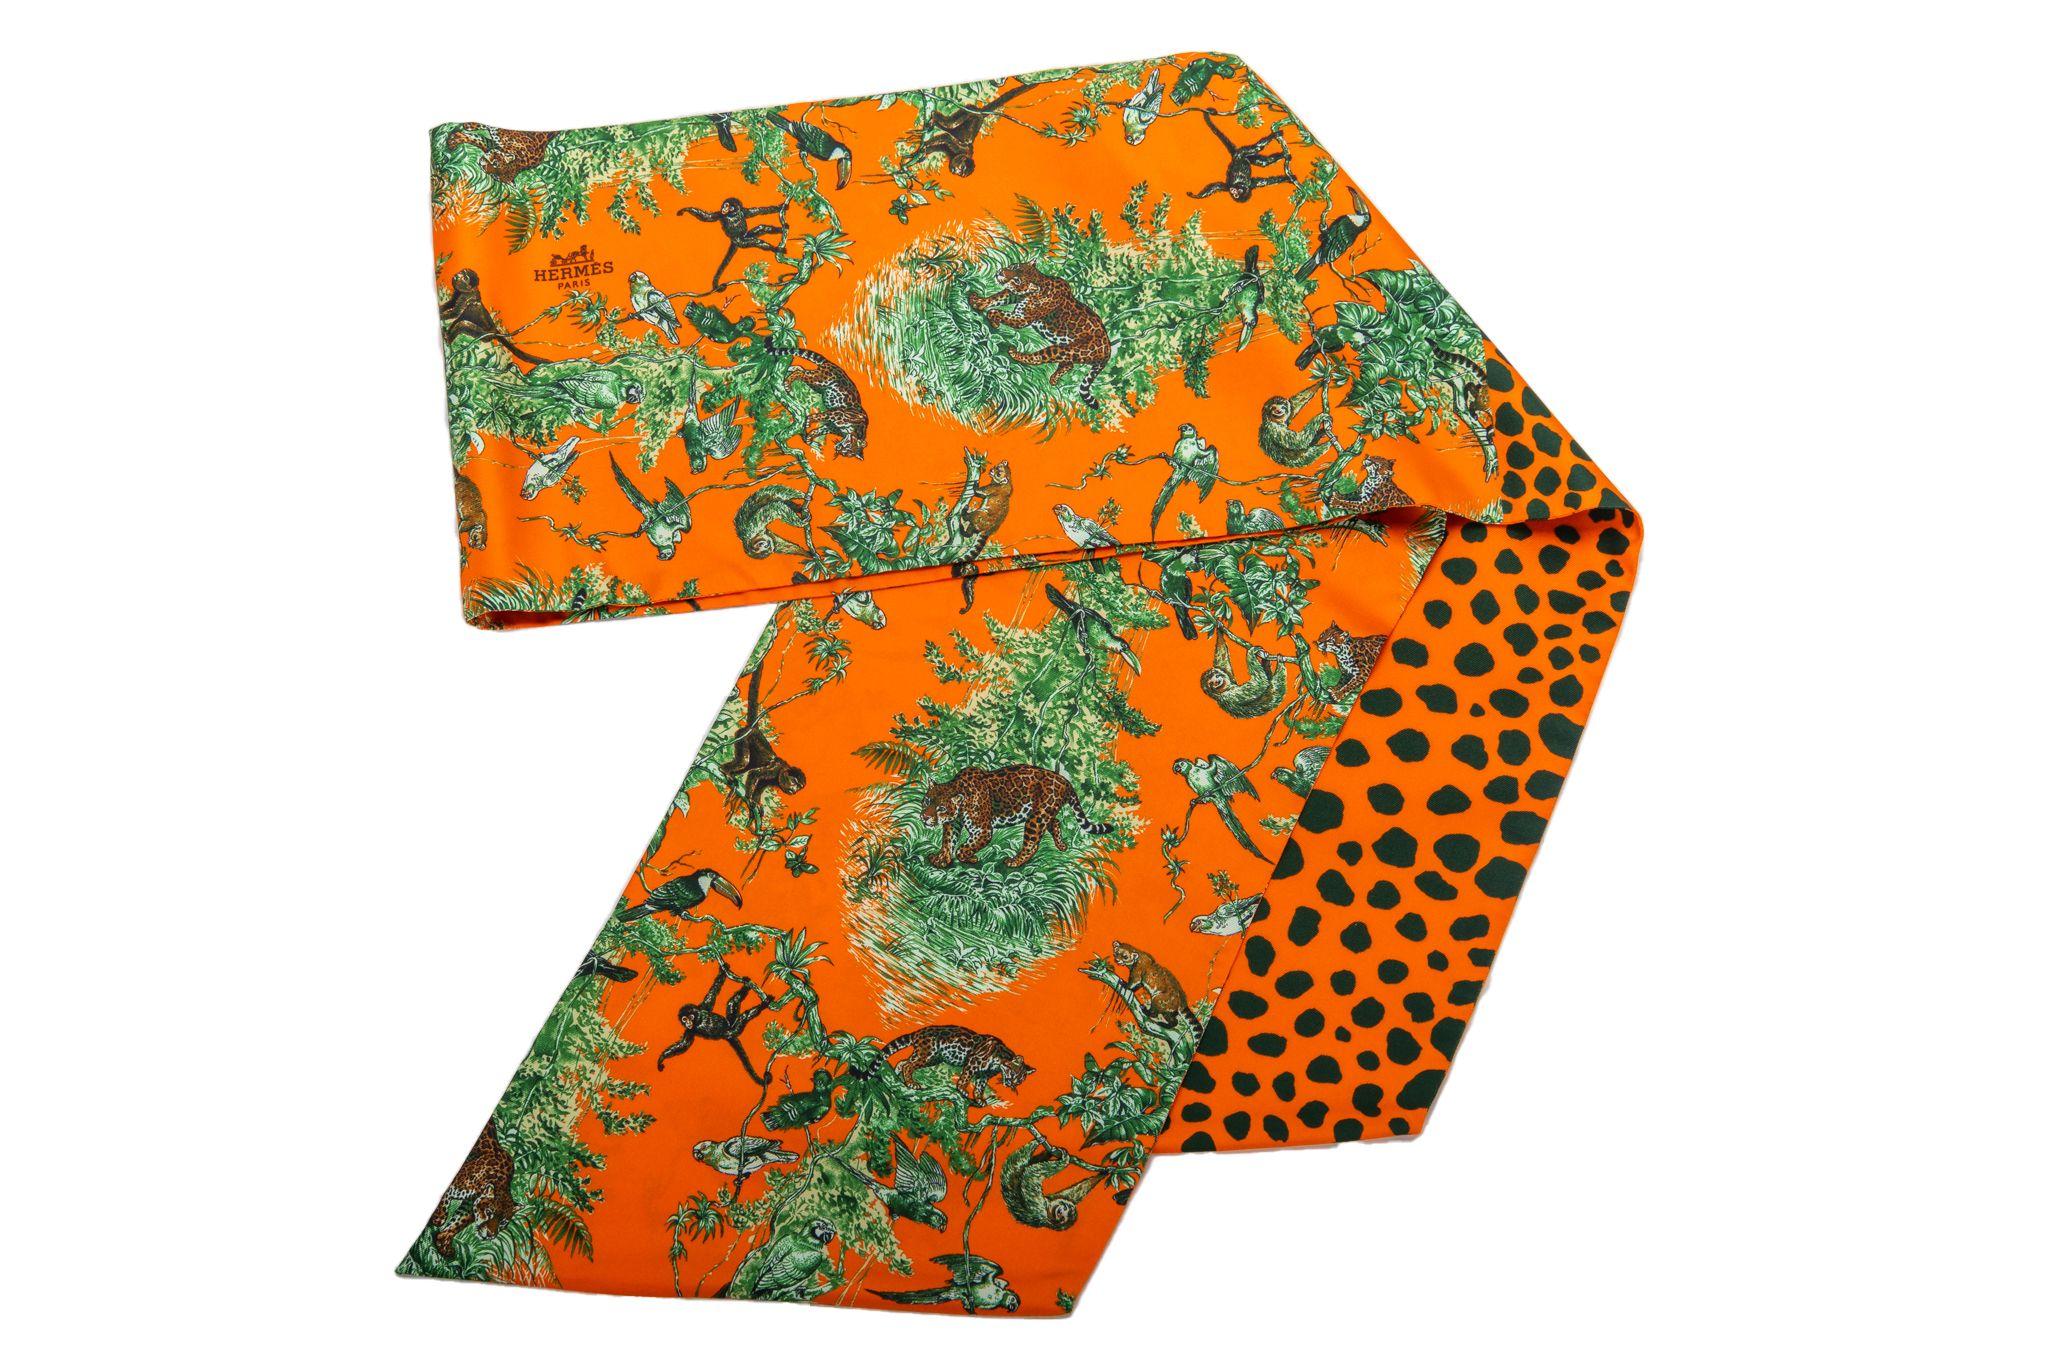 Hermès Equateur Orange maxi twilly scarf with feather floral detail. Hand-rolled edges. Discontinued size. New in box.
